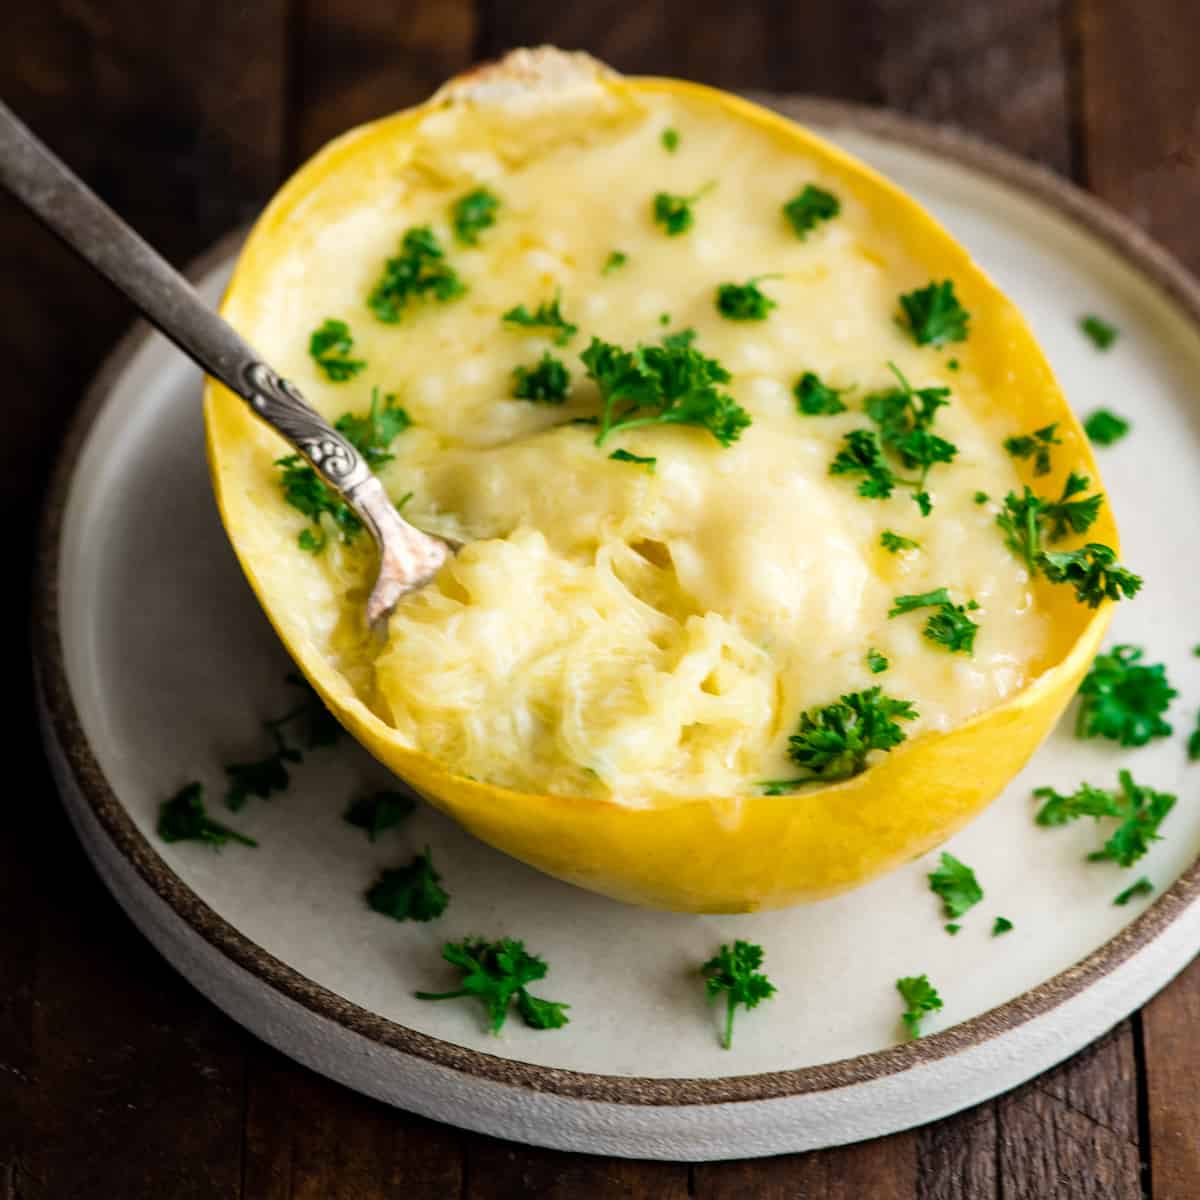 Front view of a half of a spaghetti squash with a fork in it and Spaghetti Squash Mac and Cheese sprinkled with parsley